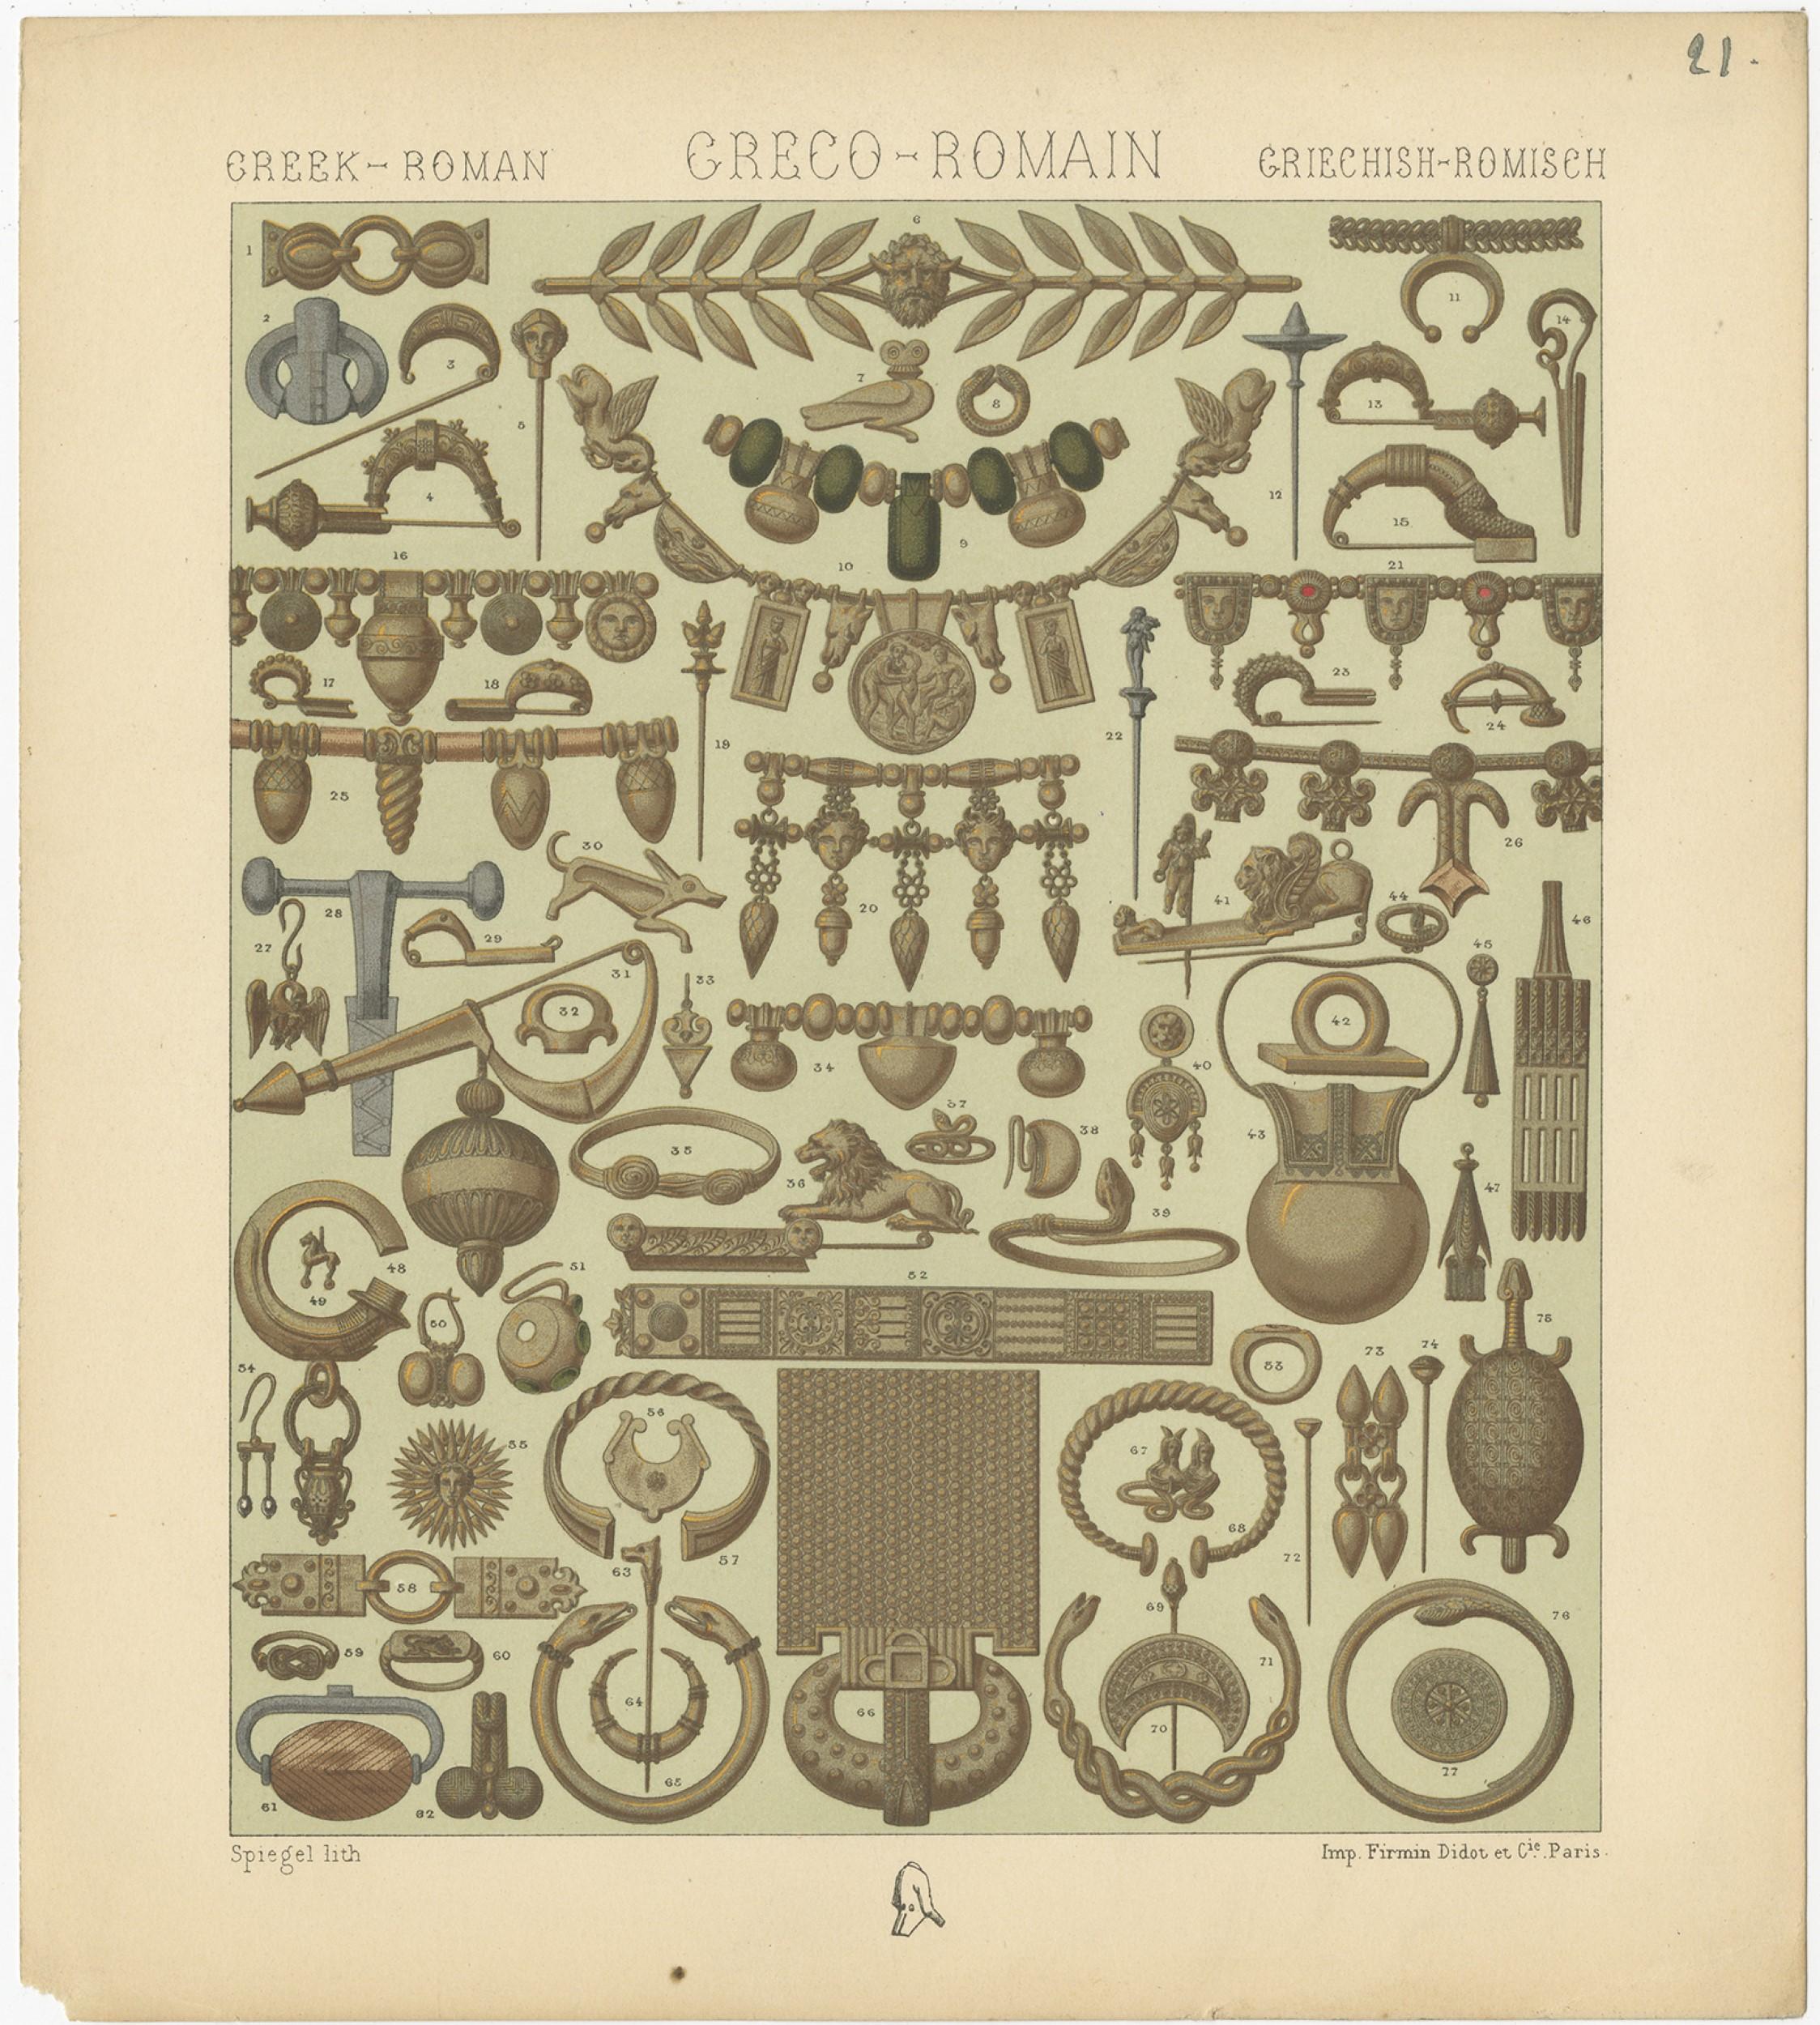 Antique print titled 'Greece-Roman, Grece-Romain, Griechenland-Romisch'. Chromolithograph of Greece-Roman decorative objects. This print originates from 'Le Costume Historique' by M.A. Racinet. Published, circa 1880.